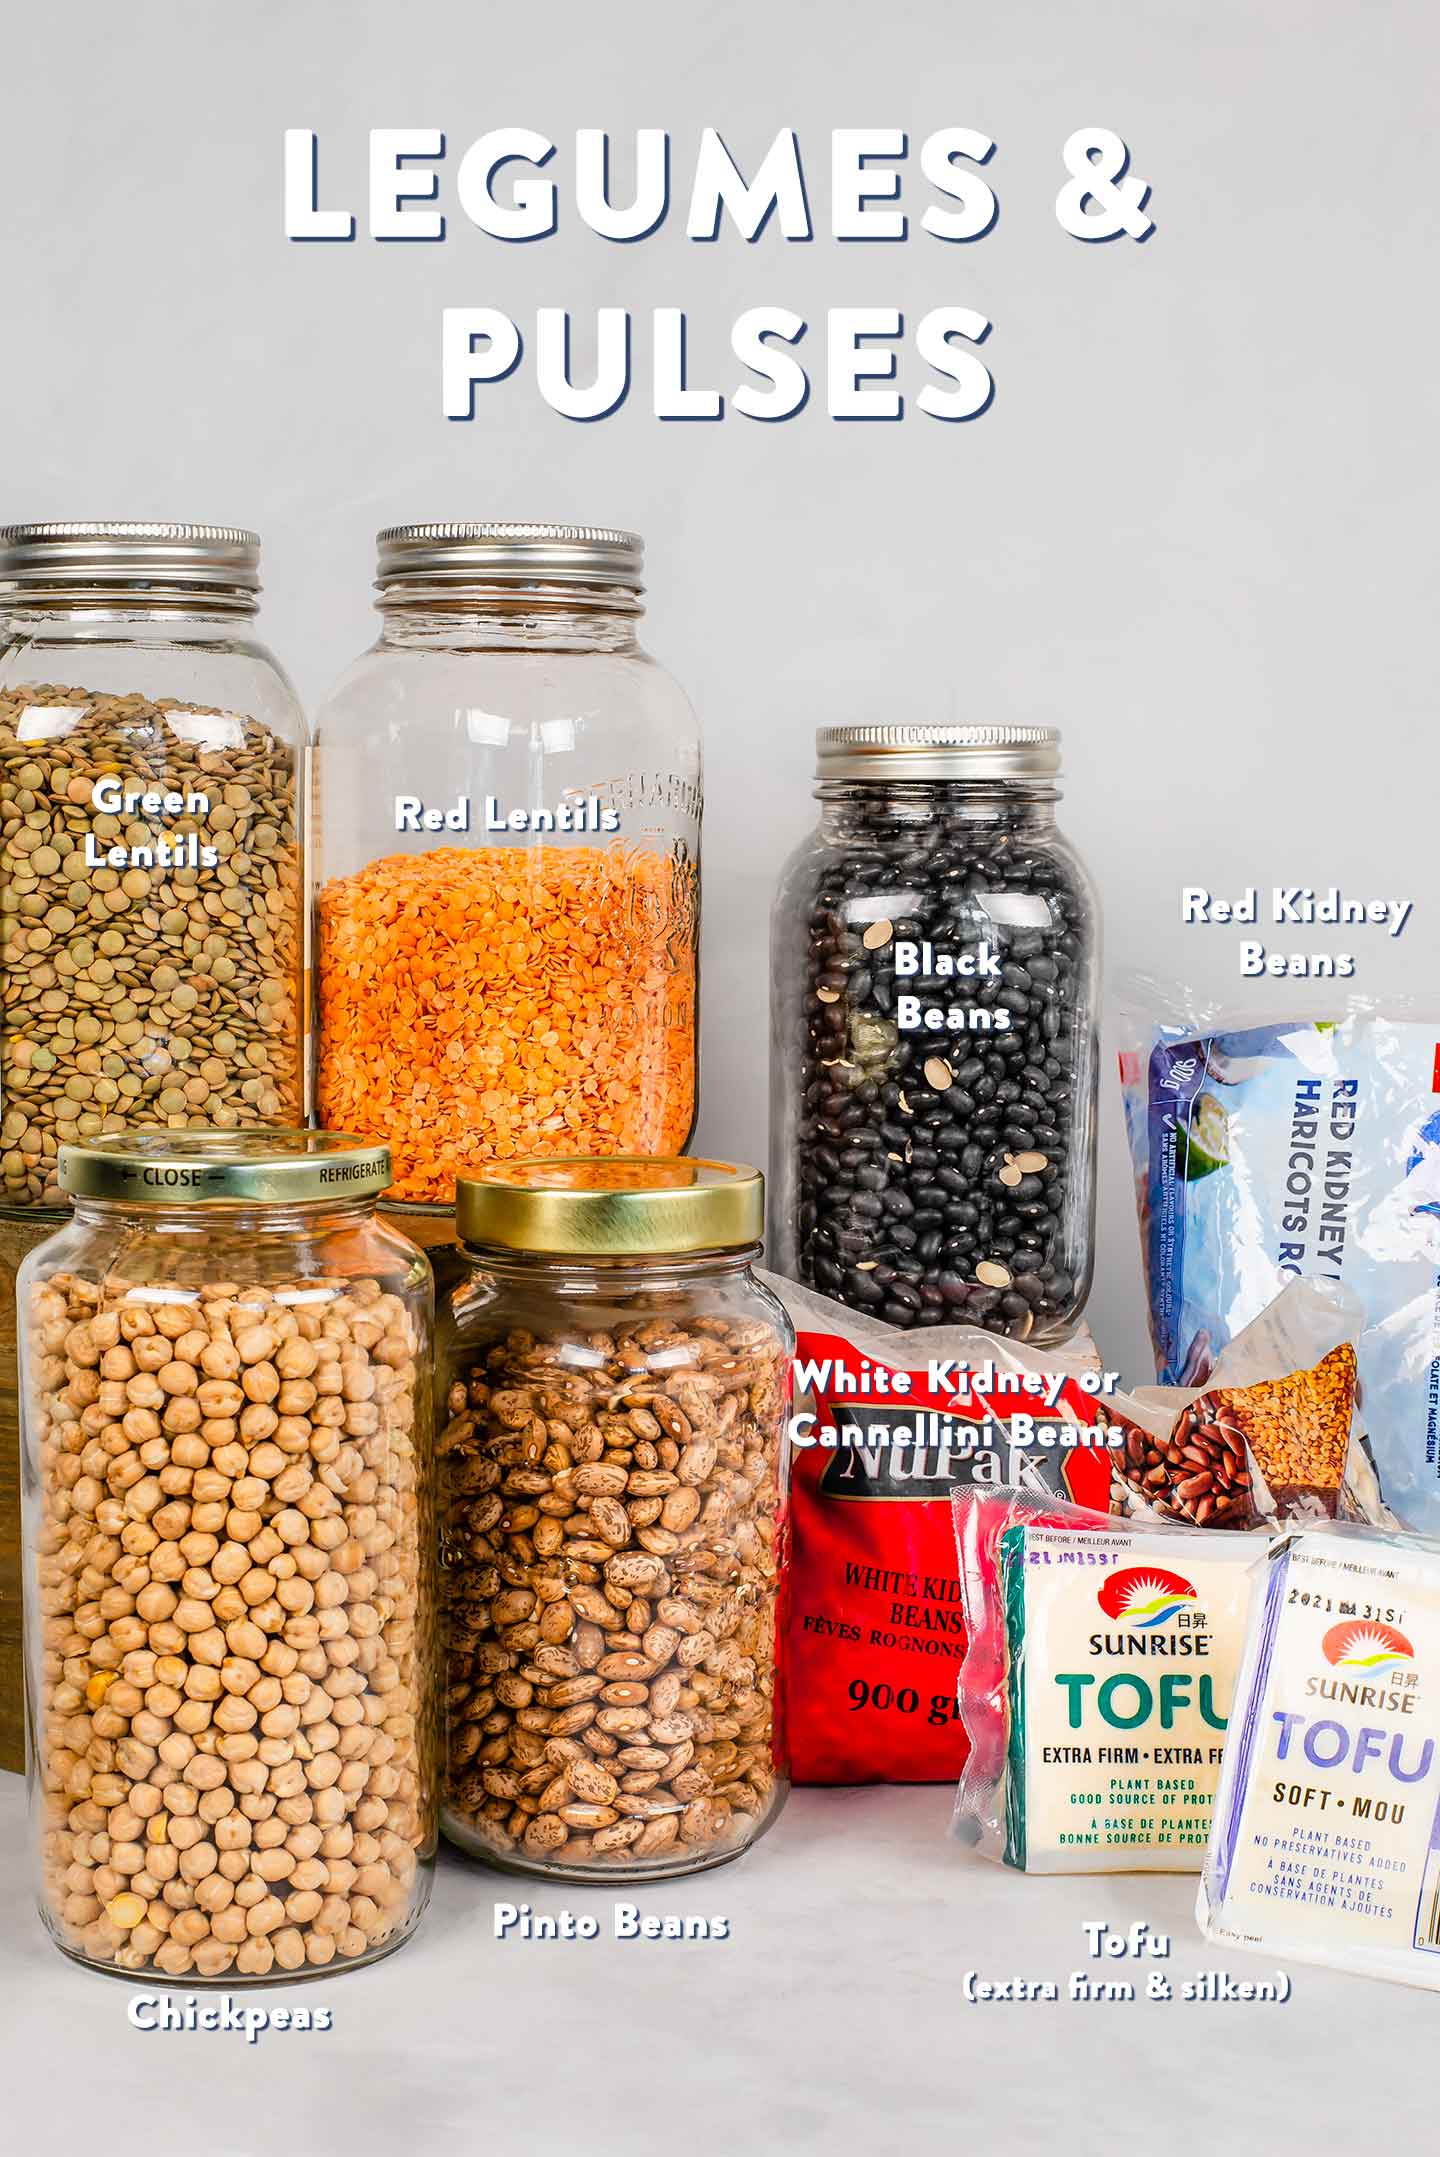 Dried legumes and pulses in various glass jars with two packages of tofu; one extra firm, and one soft or silken.